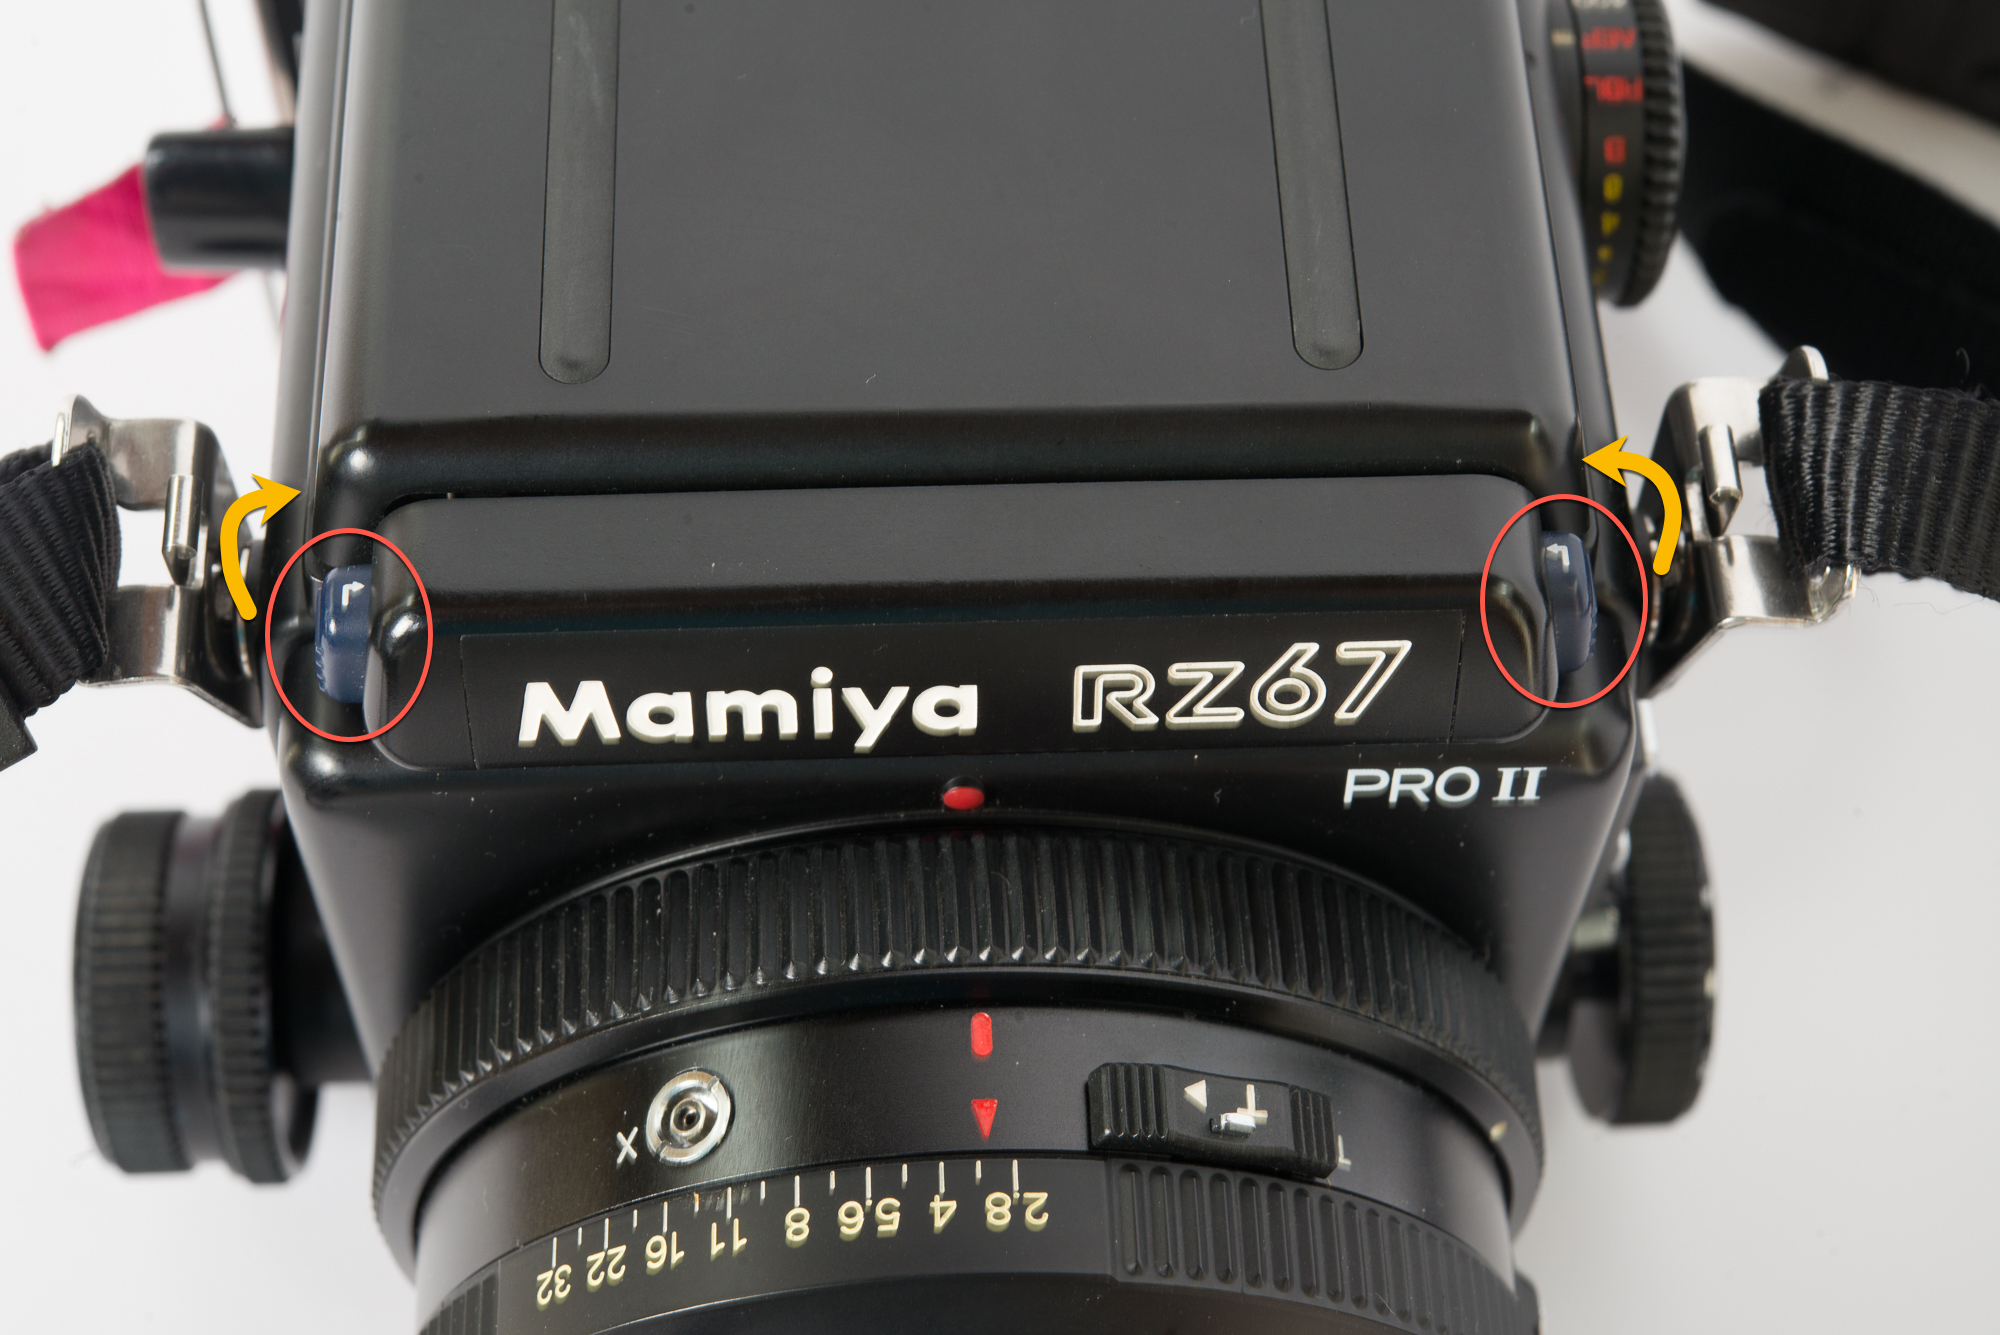 Mamiya RZ67 - Remove and replace viewfinder (step 1)